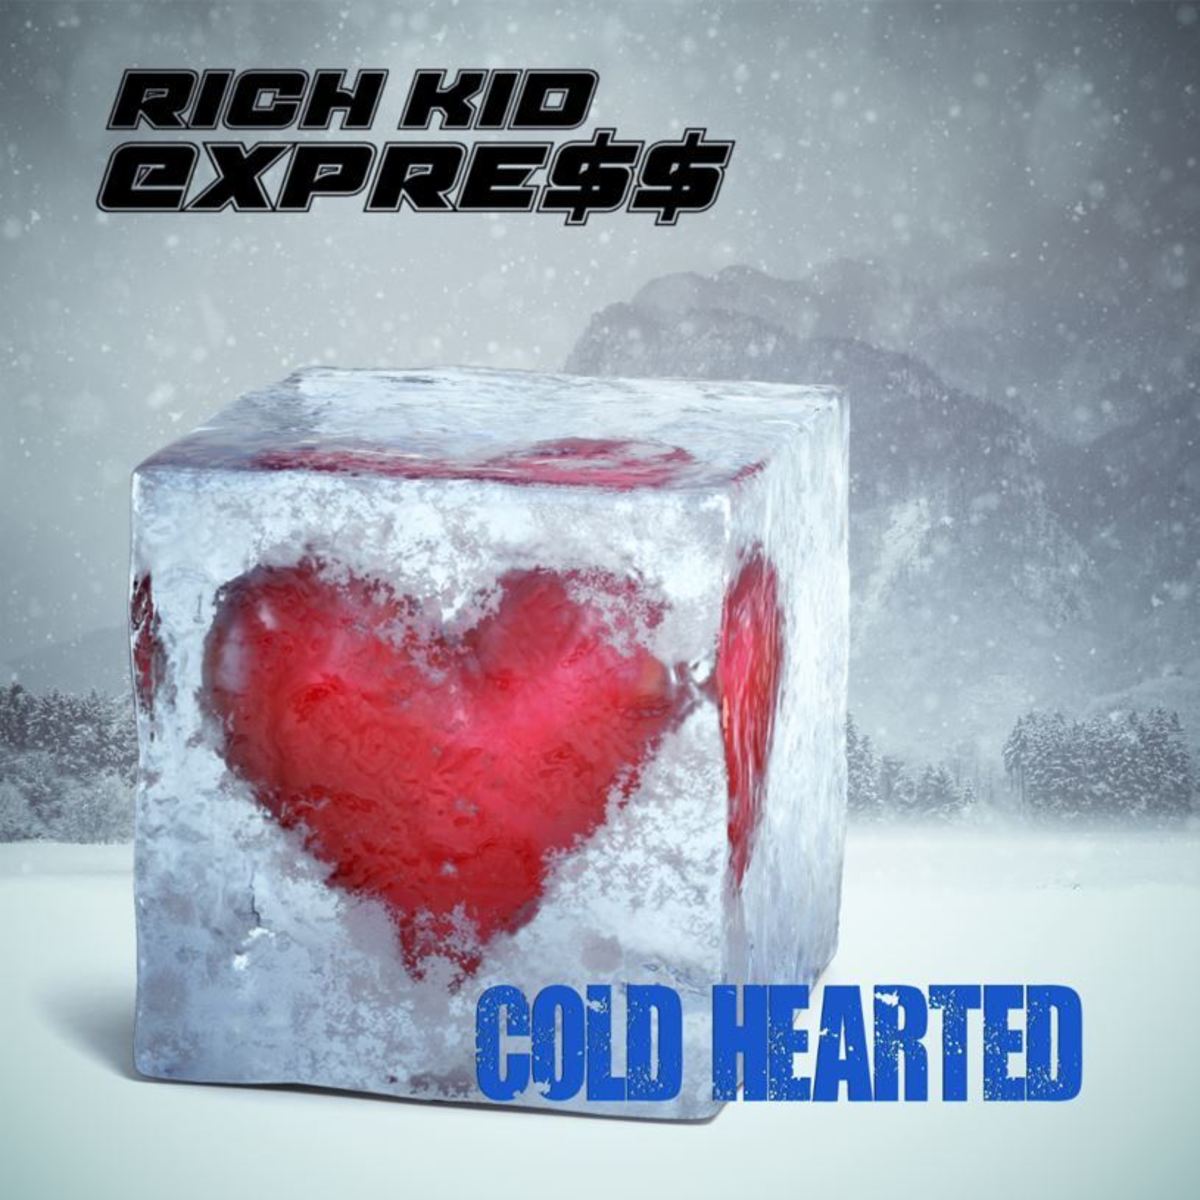 Rich Kid Express "Cold Hearted" single